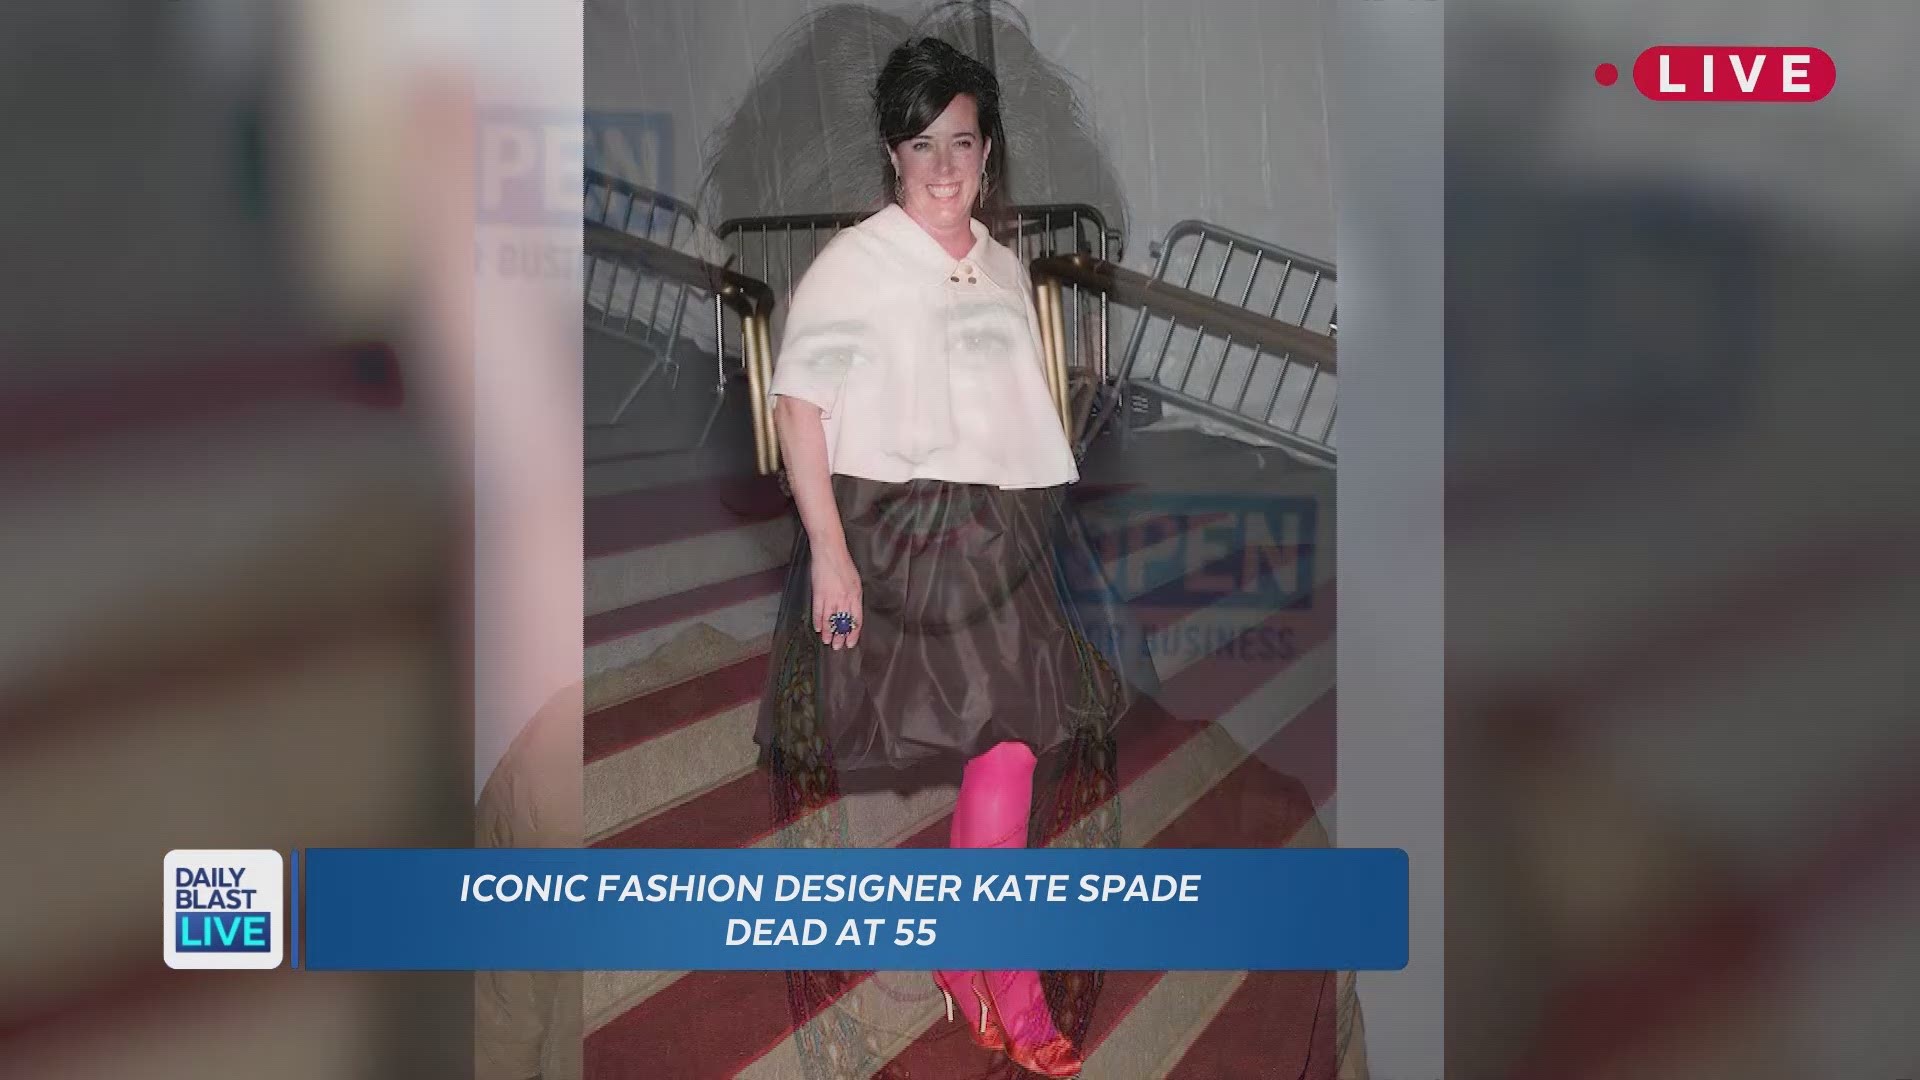 Fashion designer Kate Spade was found dead in her New York City apartment Tuesday morning and authorities believe her death was an apparent suicide. The 55-year-old was found by housekeeping and no other members of the Spade family were at the home. Daily